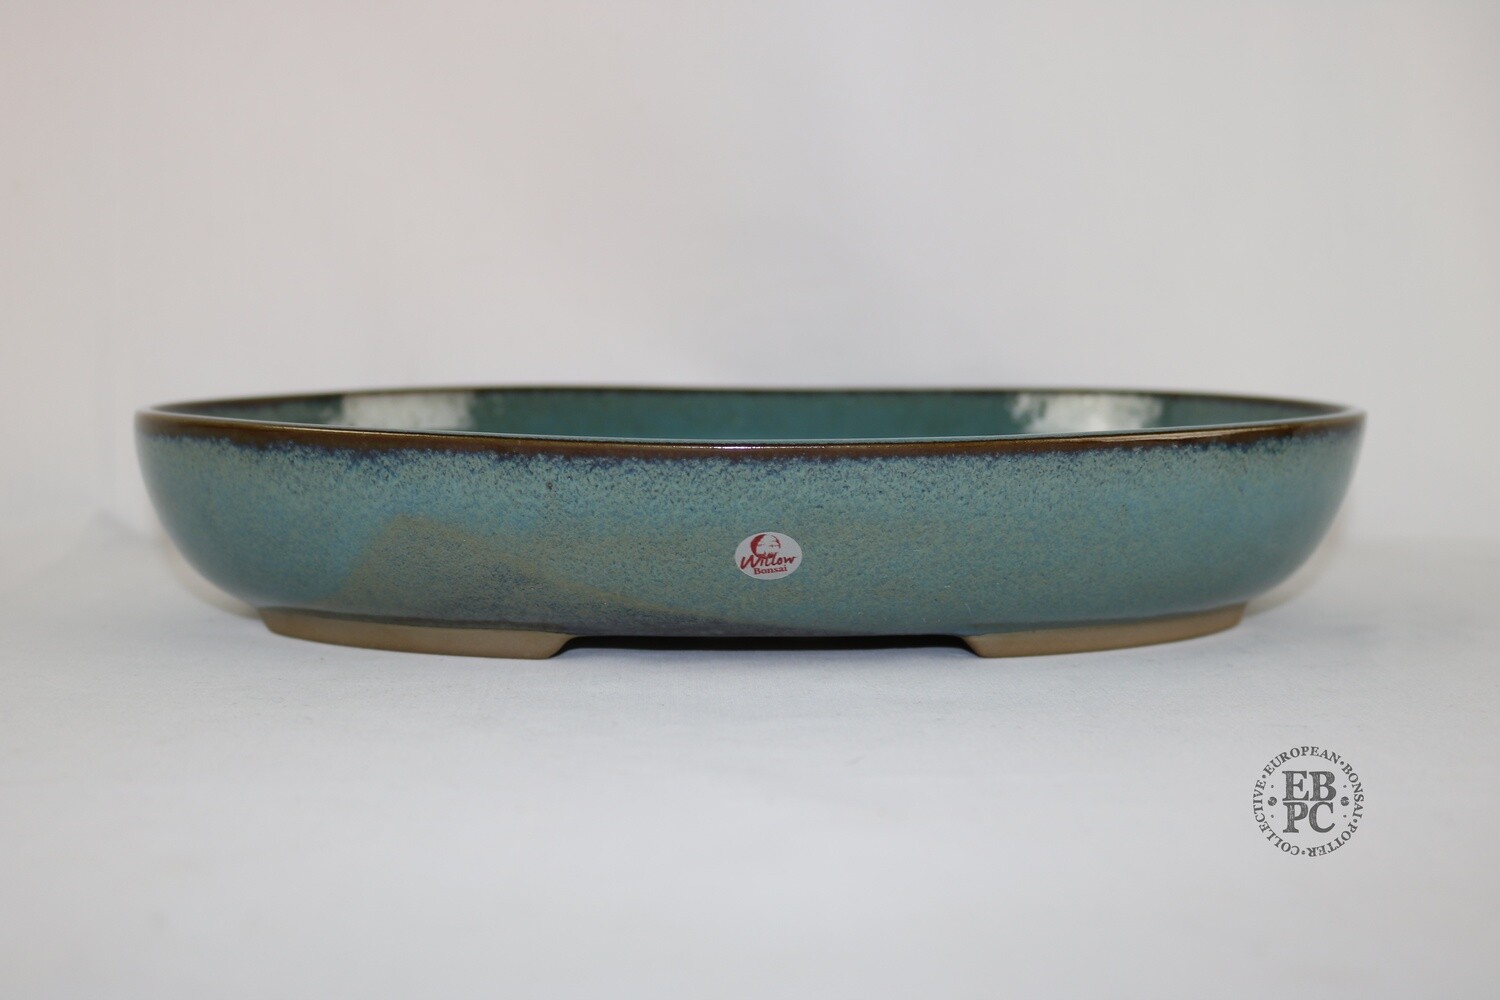 Willow Bonsai Pots. 31.2cm; Oval; Peacock Glaze; Bluish Green; Browns; Recessed Feet; Made in South Africa.